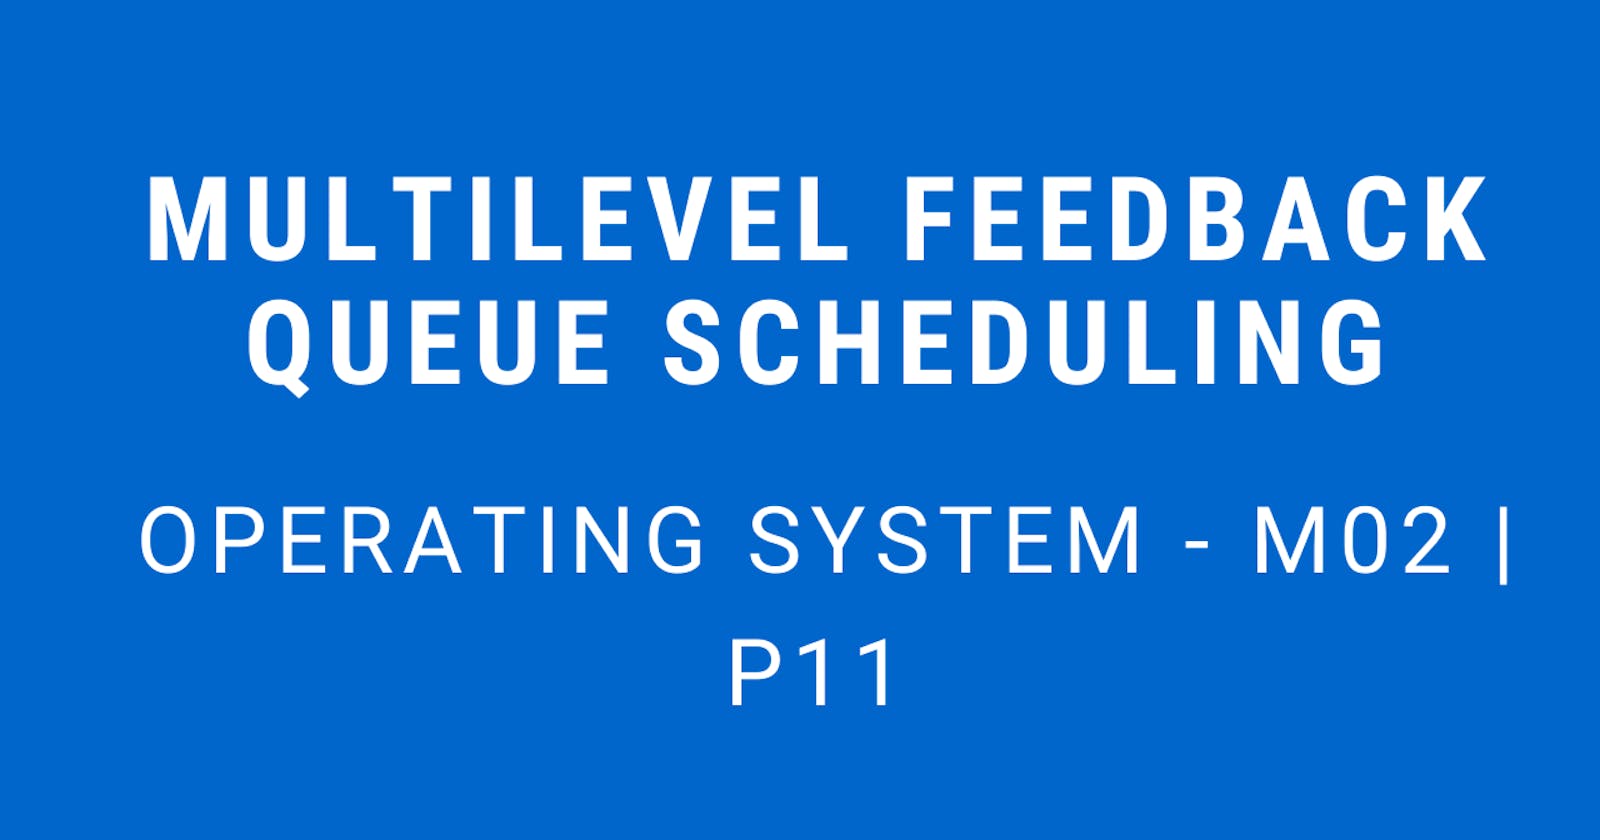 Multilevel Feedback Queue Scheduling | Operating System - M02 P11